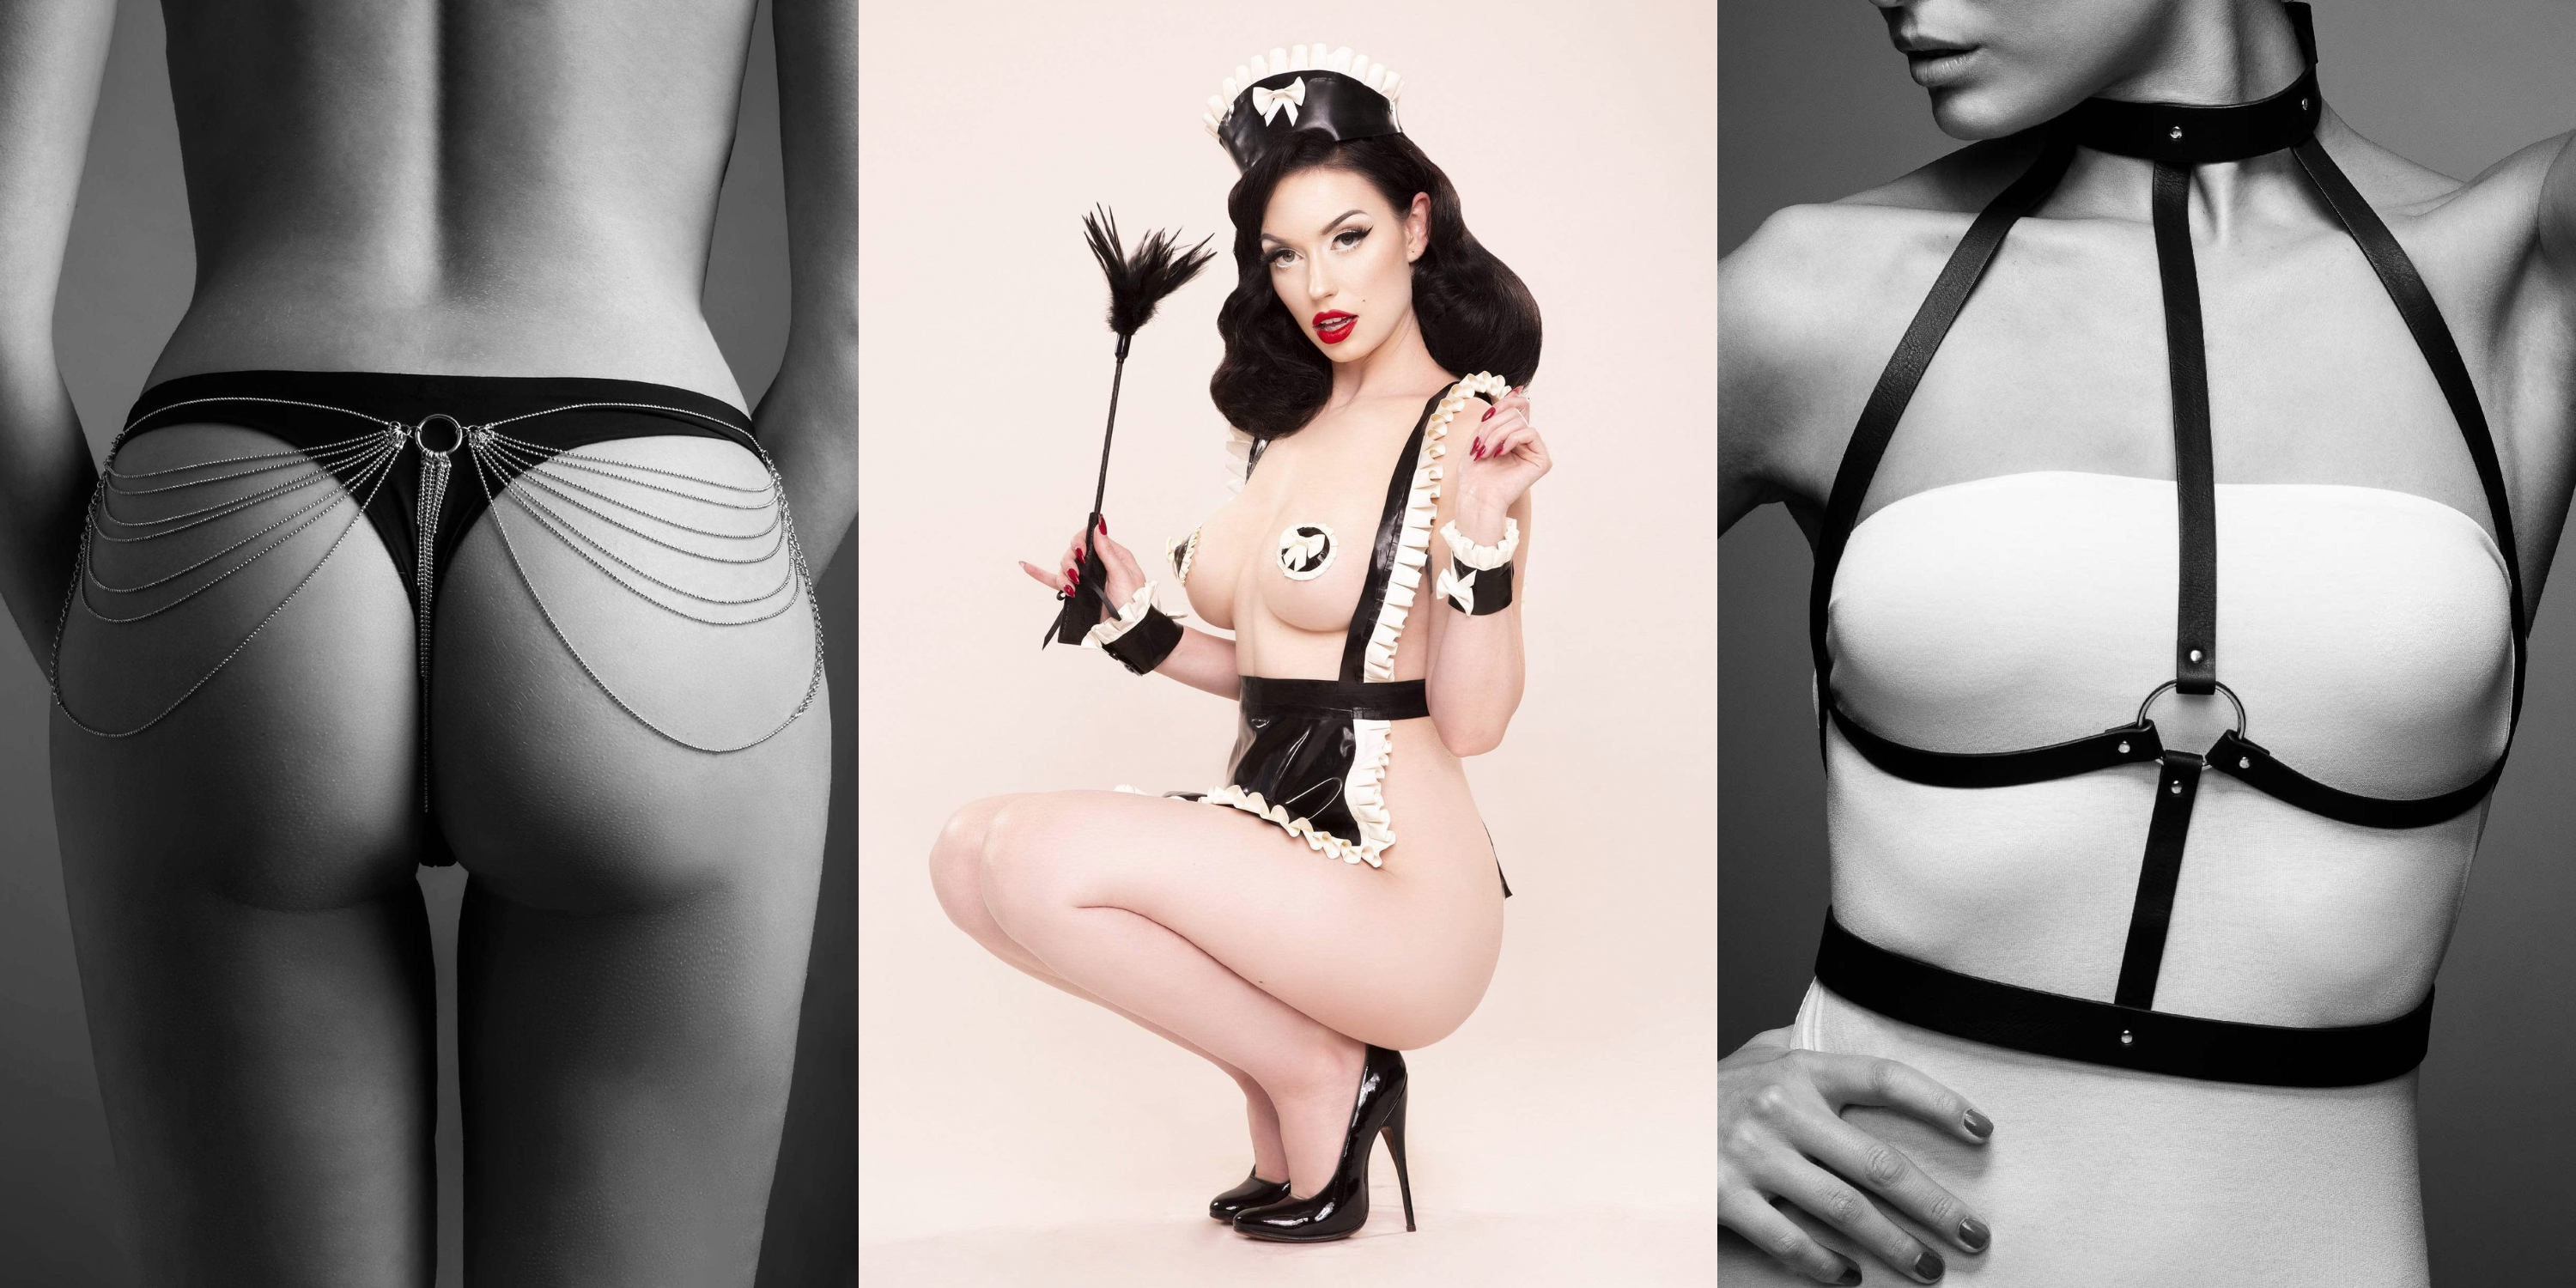 Accessories Latex, Harnesses and Chains